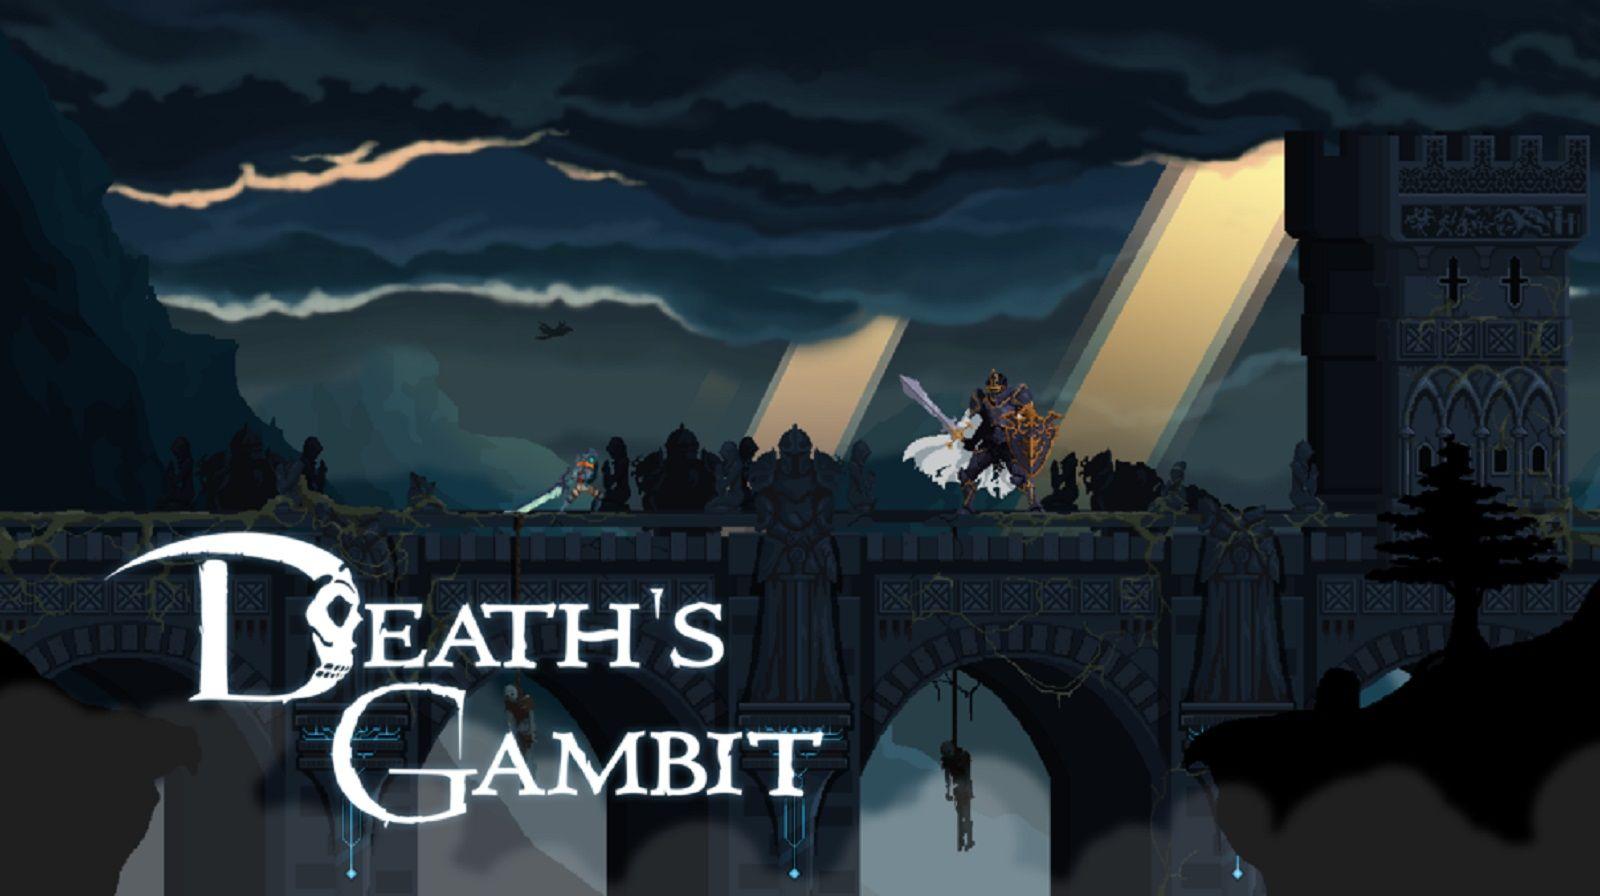 Death's Gambit screenshots, image and picture